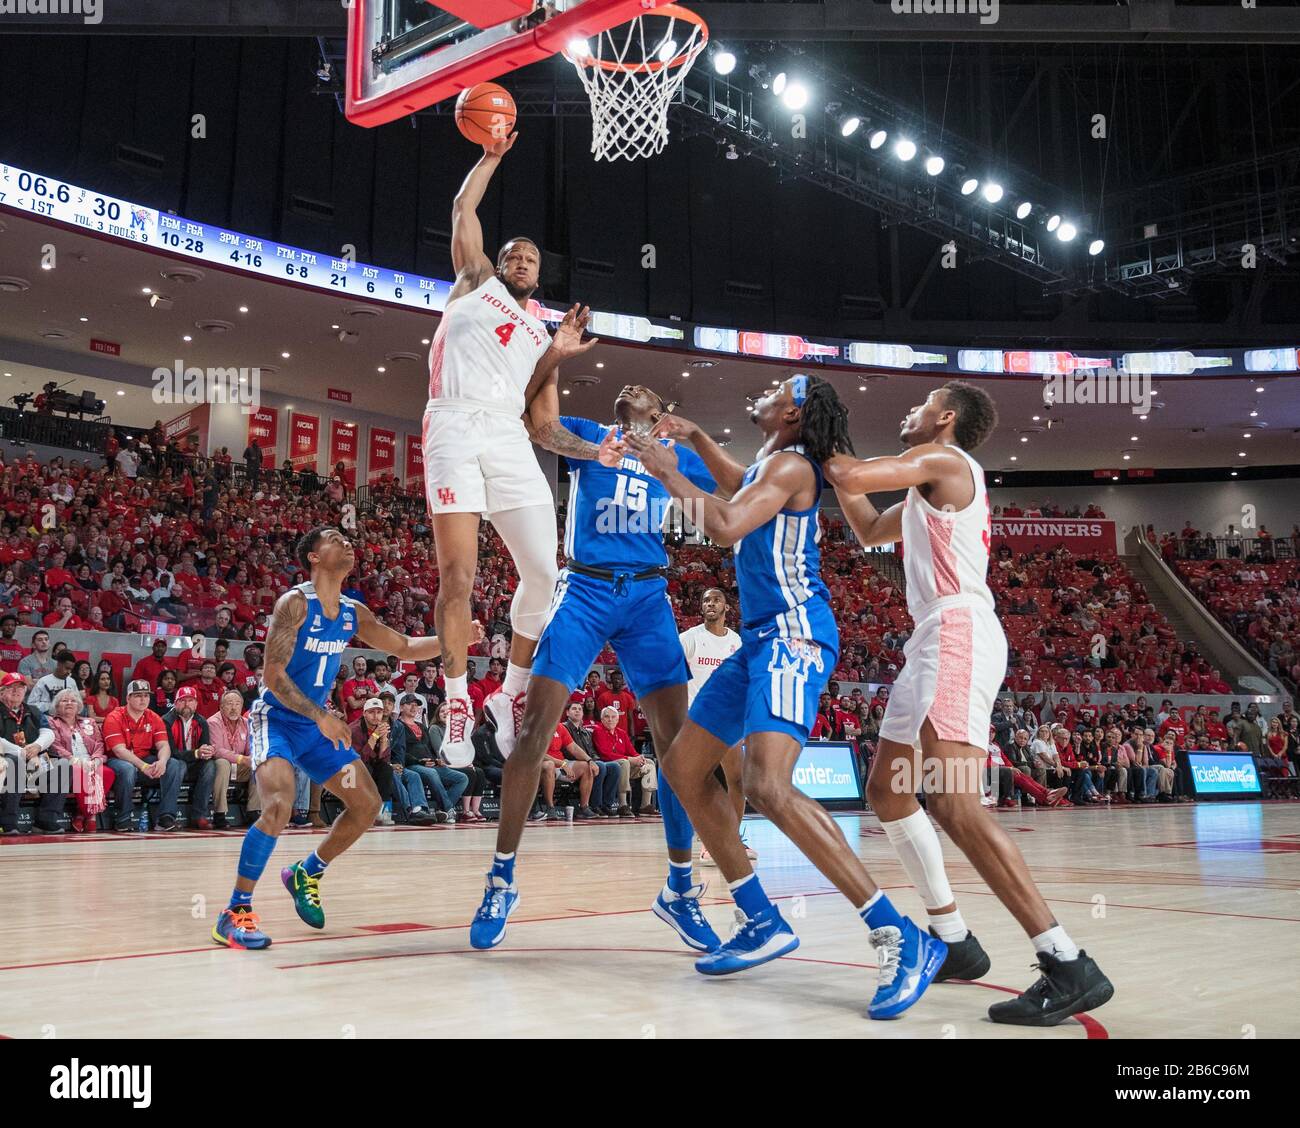 March 8, 2020: Houston Cougars forward Justin Gorham (4) grabs a rebound over Memphis Tigers forward Lance Thomas (15) in the NCAA basketball game between the Memphis Tigers and the Houston Cougars at the Fertitta Center in Houston, Texas. Houston defeated Memphis 64-57. Prentice C. James/CSM Stock Photo